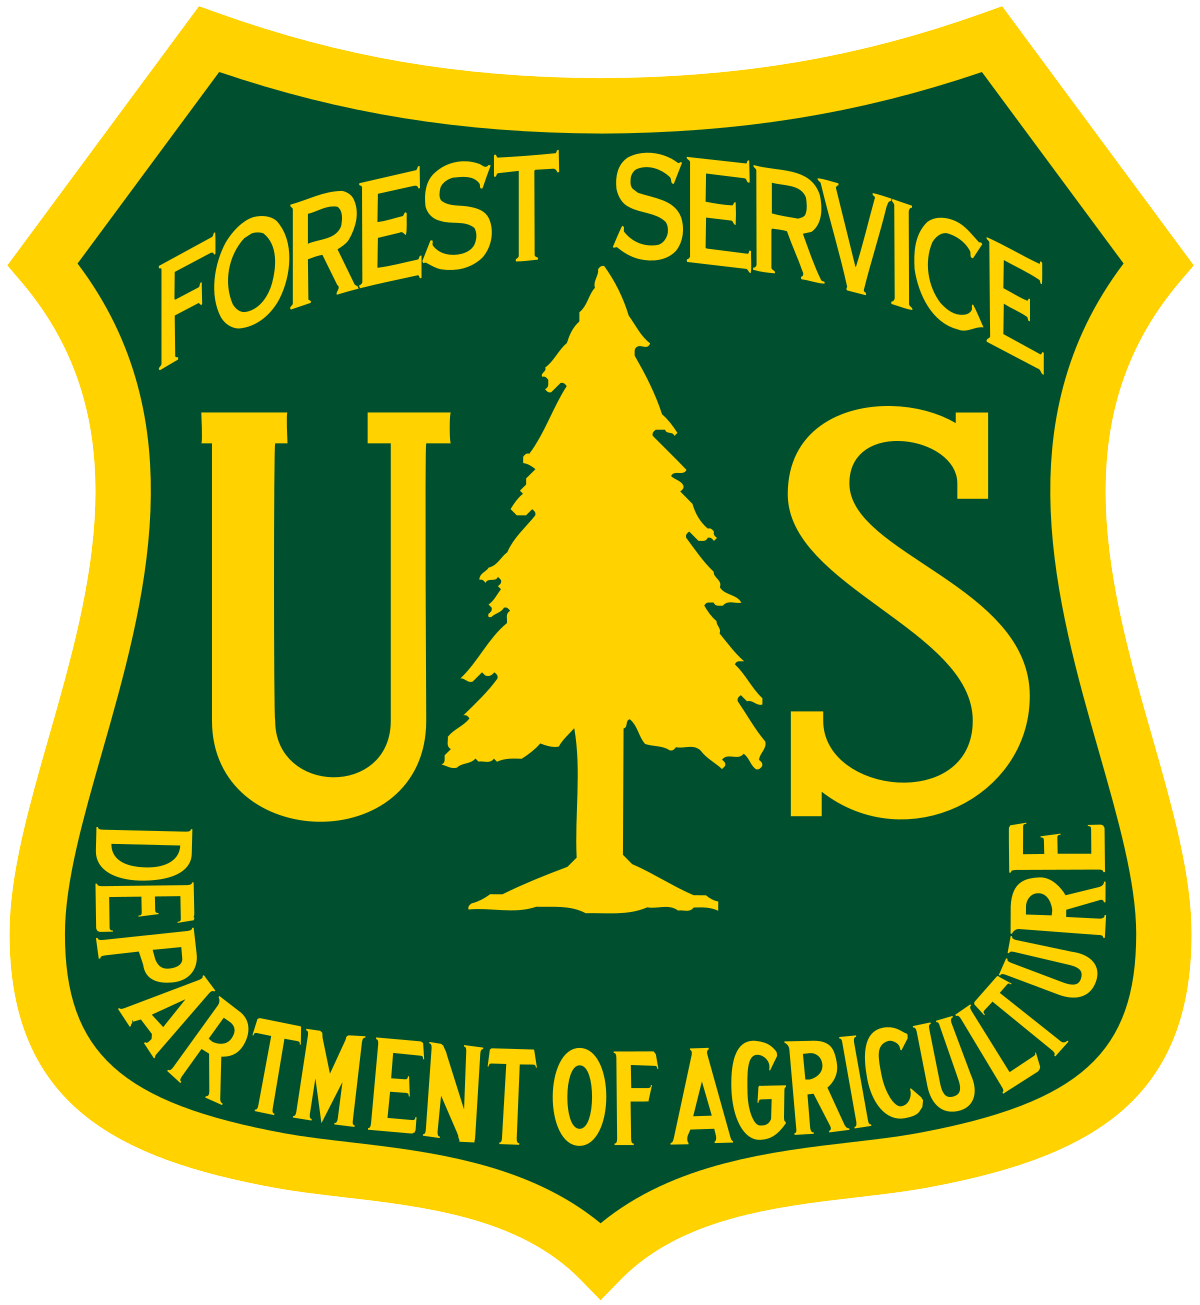 environmental and field biology National Forestry Service logo